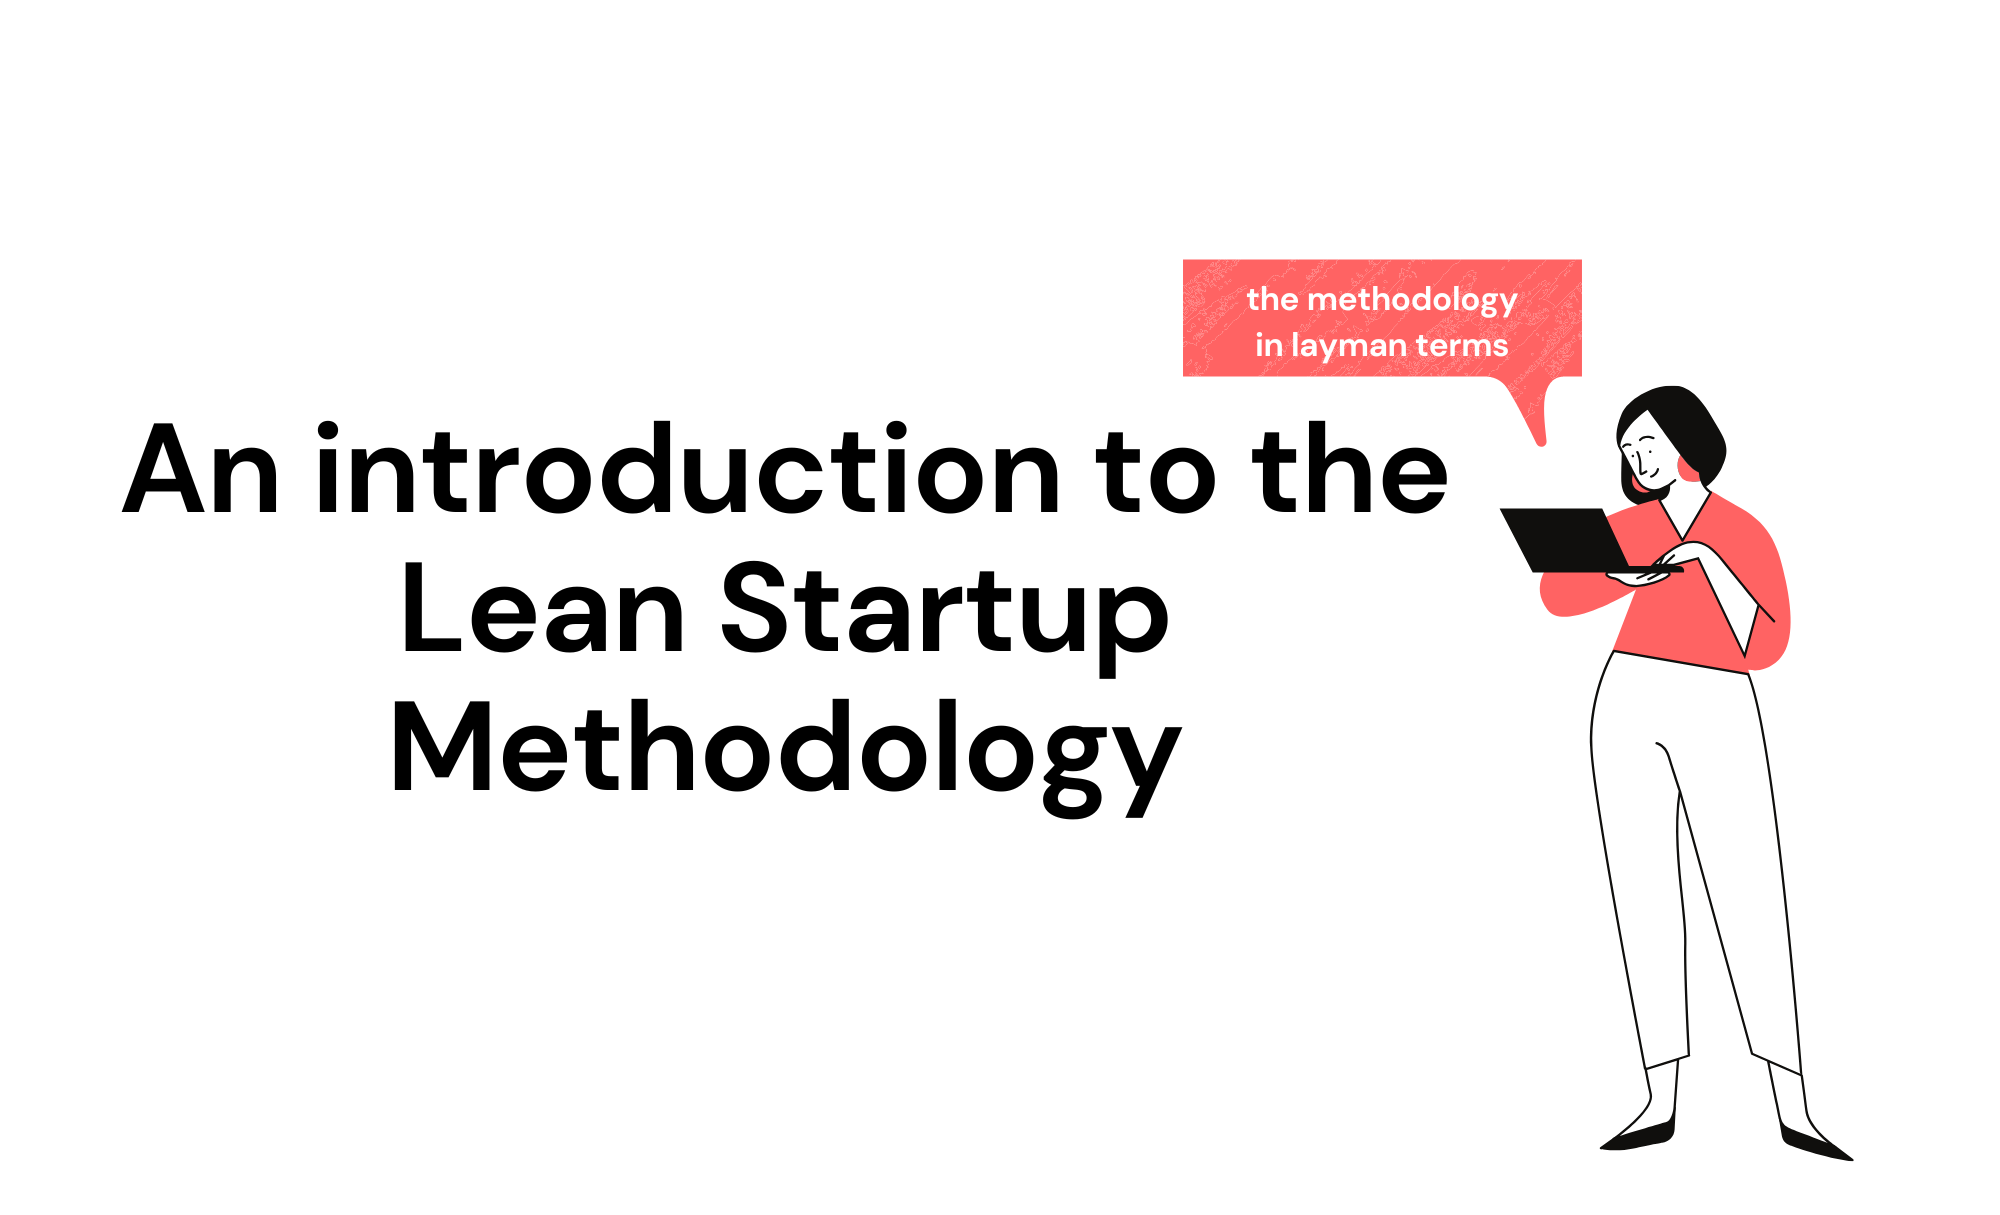 An introduction to the Lean startup methodology